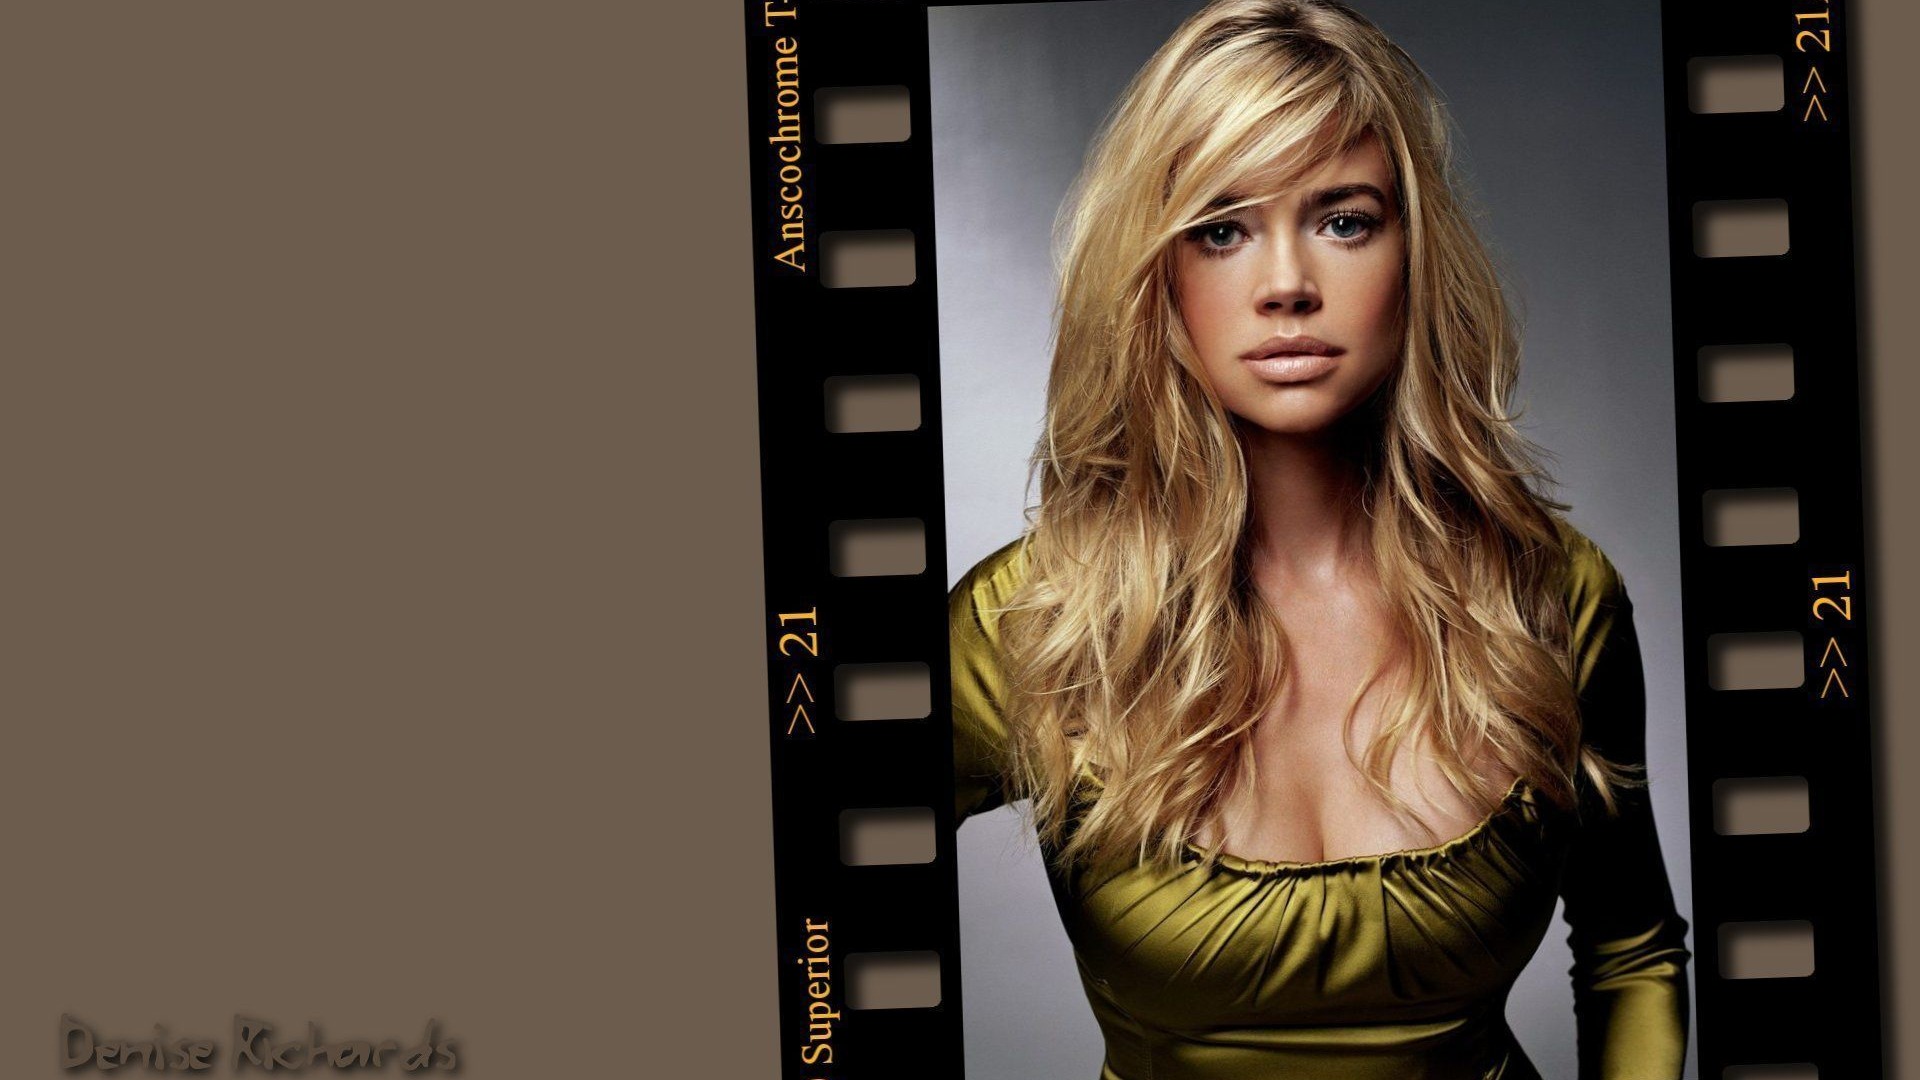 Denise Richards #003 - 1920x1080 Wallpapers Pictures Photos Images